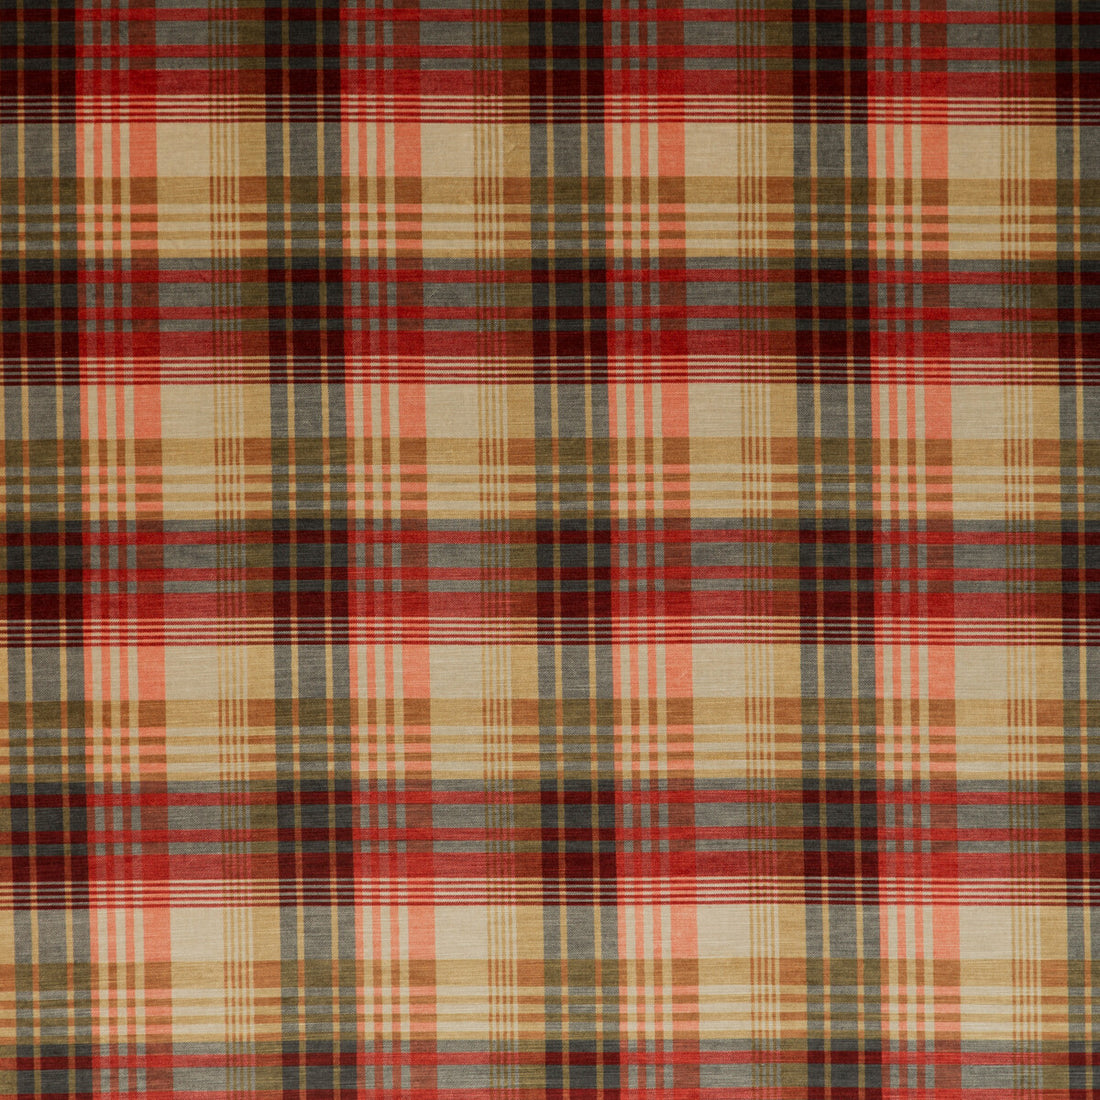 Velvet Ancient Tartan fabric in spice color - pattern FD274.T30.0 - by Mulberry in the Bohemian Weaves collection